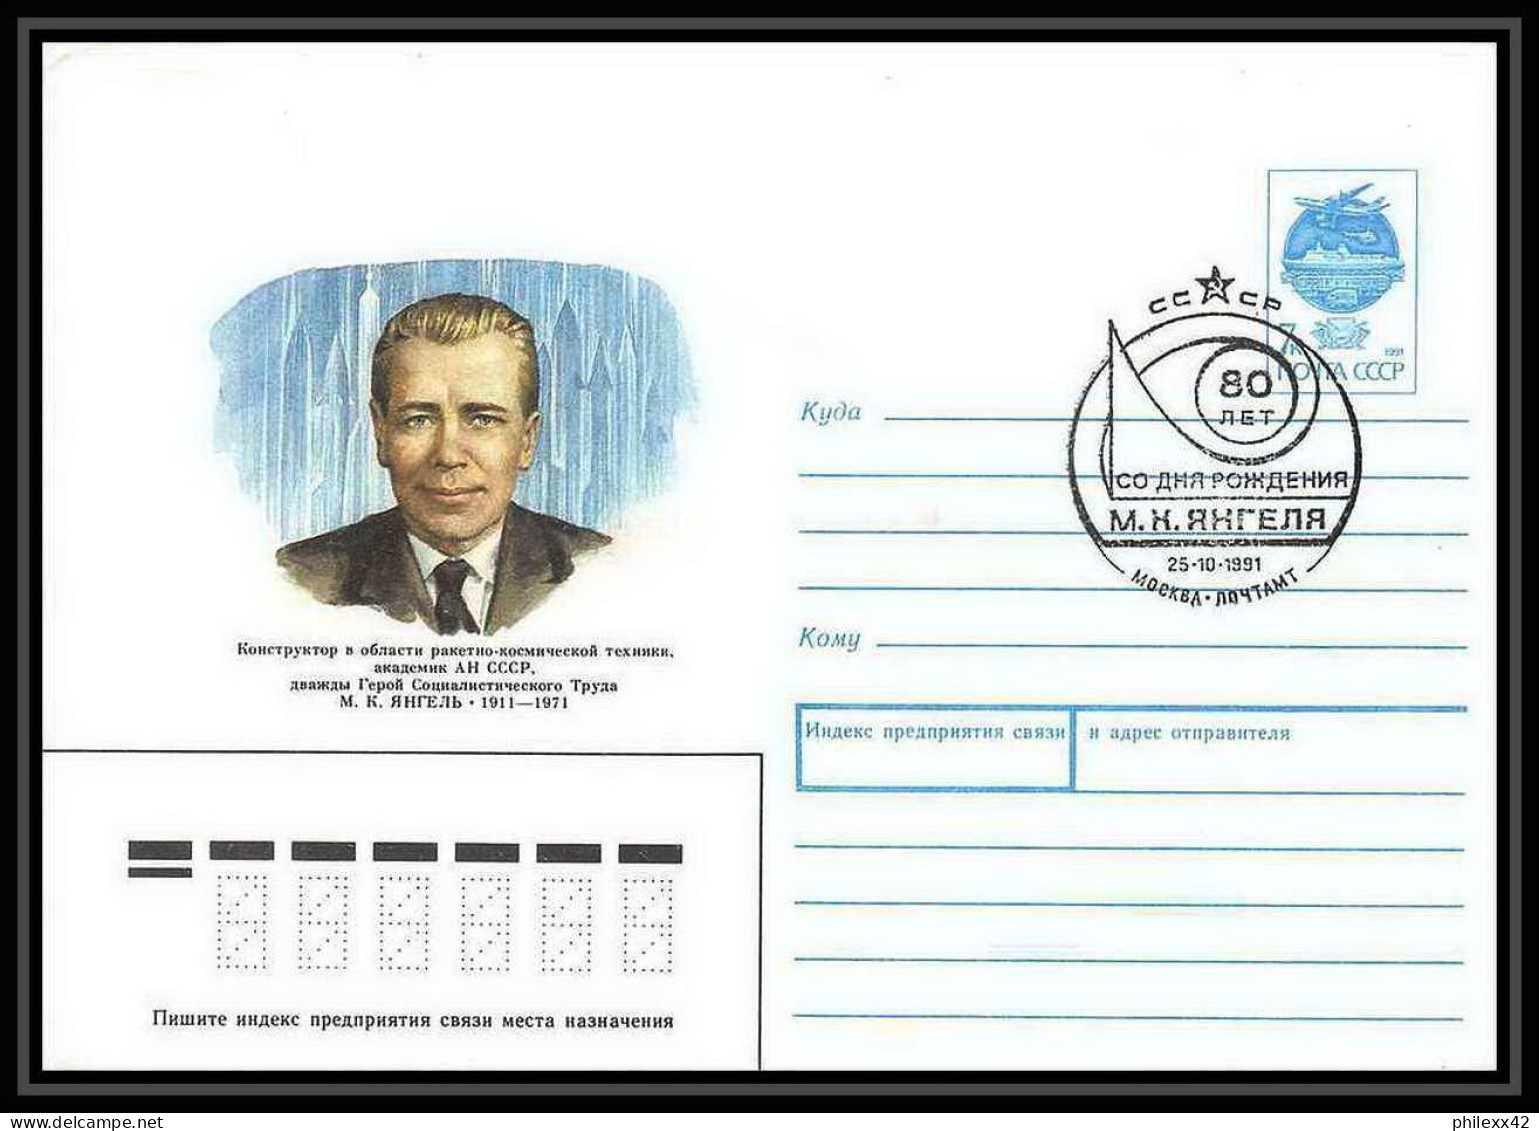 10012/ Espace (space) Entier Postal (Stamped Stationery) 25/10/1990 (urss USSR) - Rusia & URSS